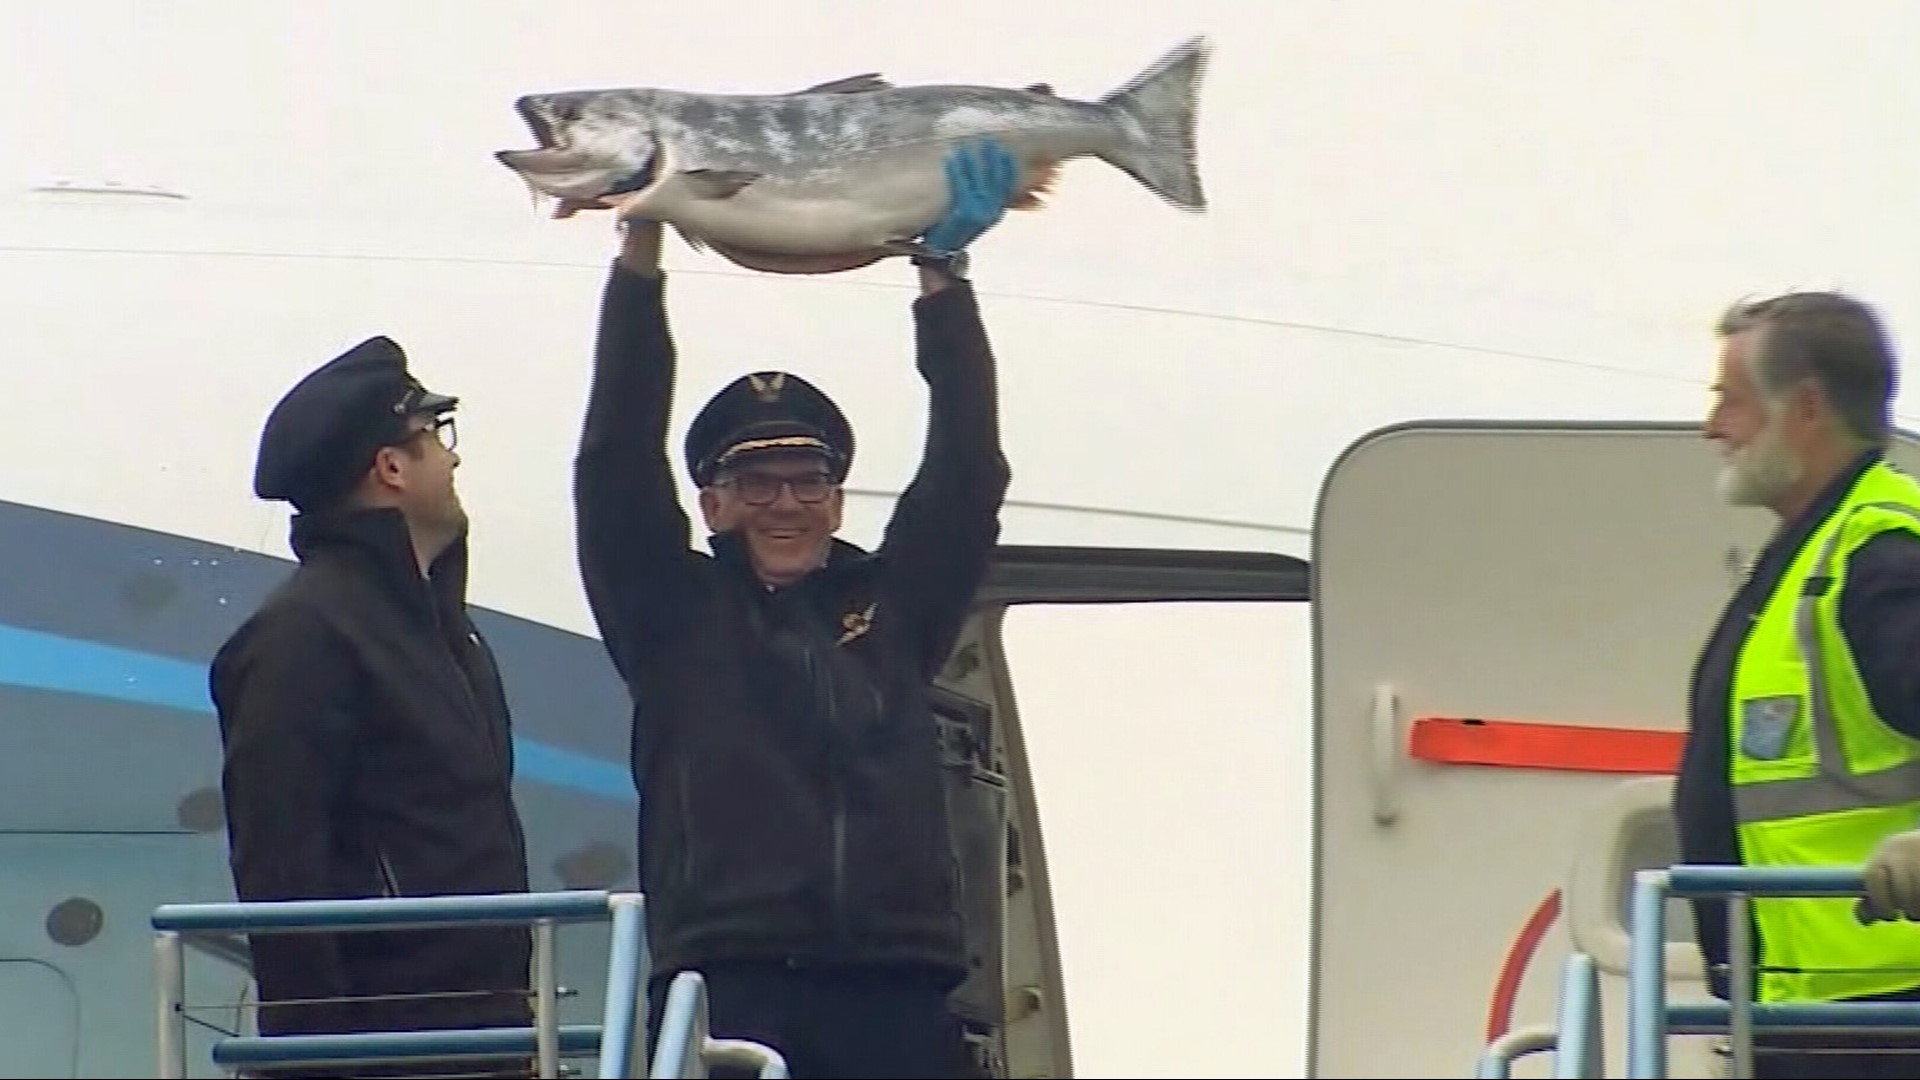 Thousands of pounds of Copper River salmon arrived at Sea-Tac Airport Friday morning.